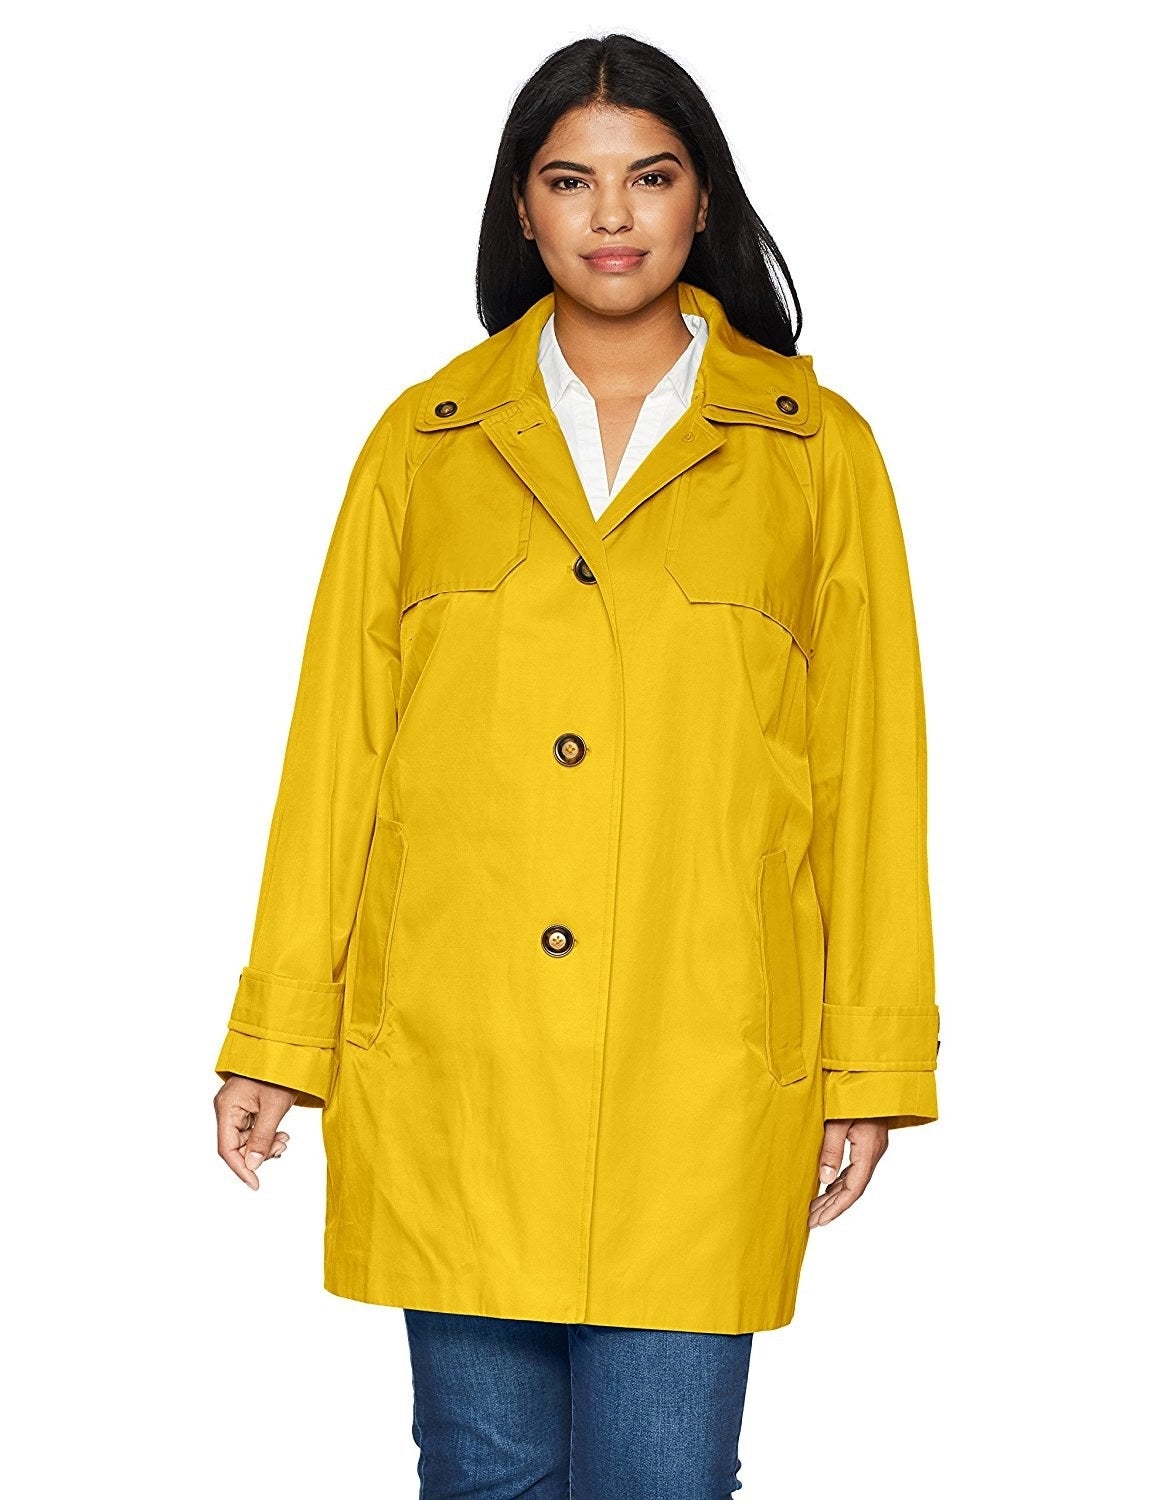 17 Of The Best Raincoats You Can Get On Amazon